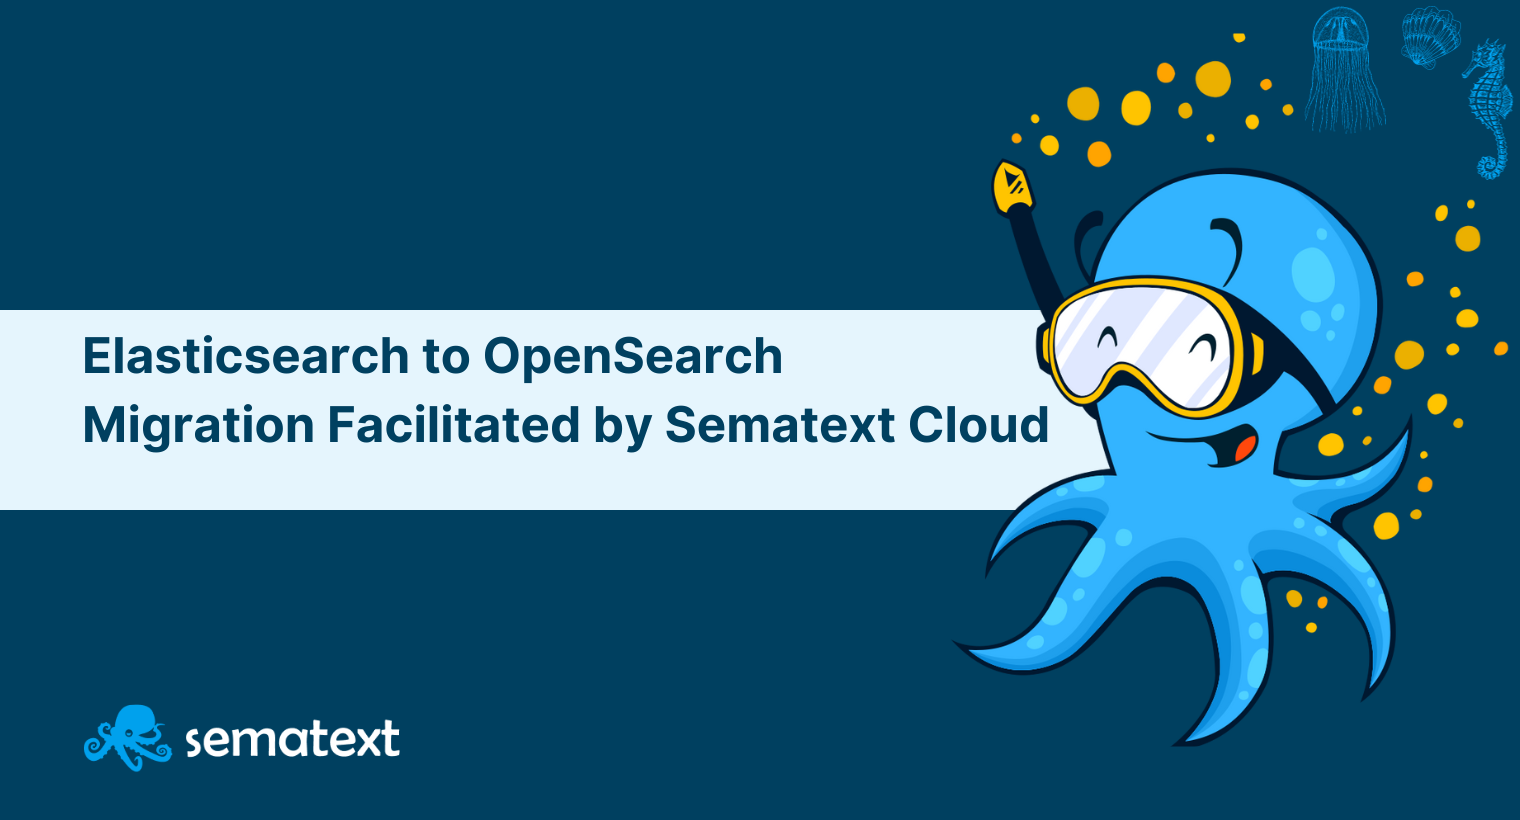 Elasticsearch to OpenSearch Migration Facilitated by Sematext Cloud